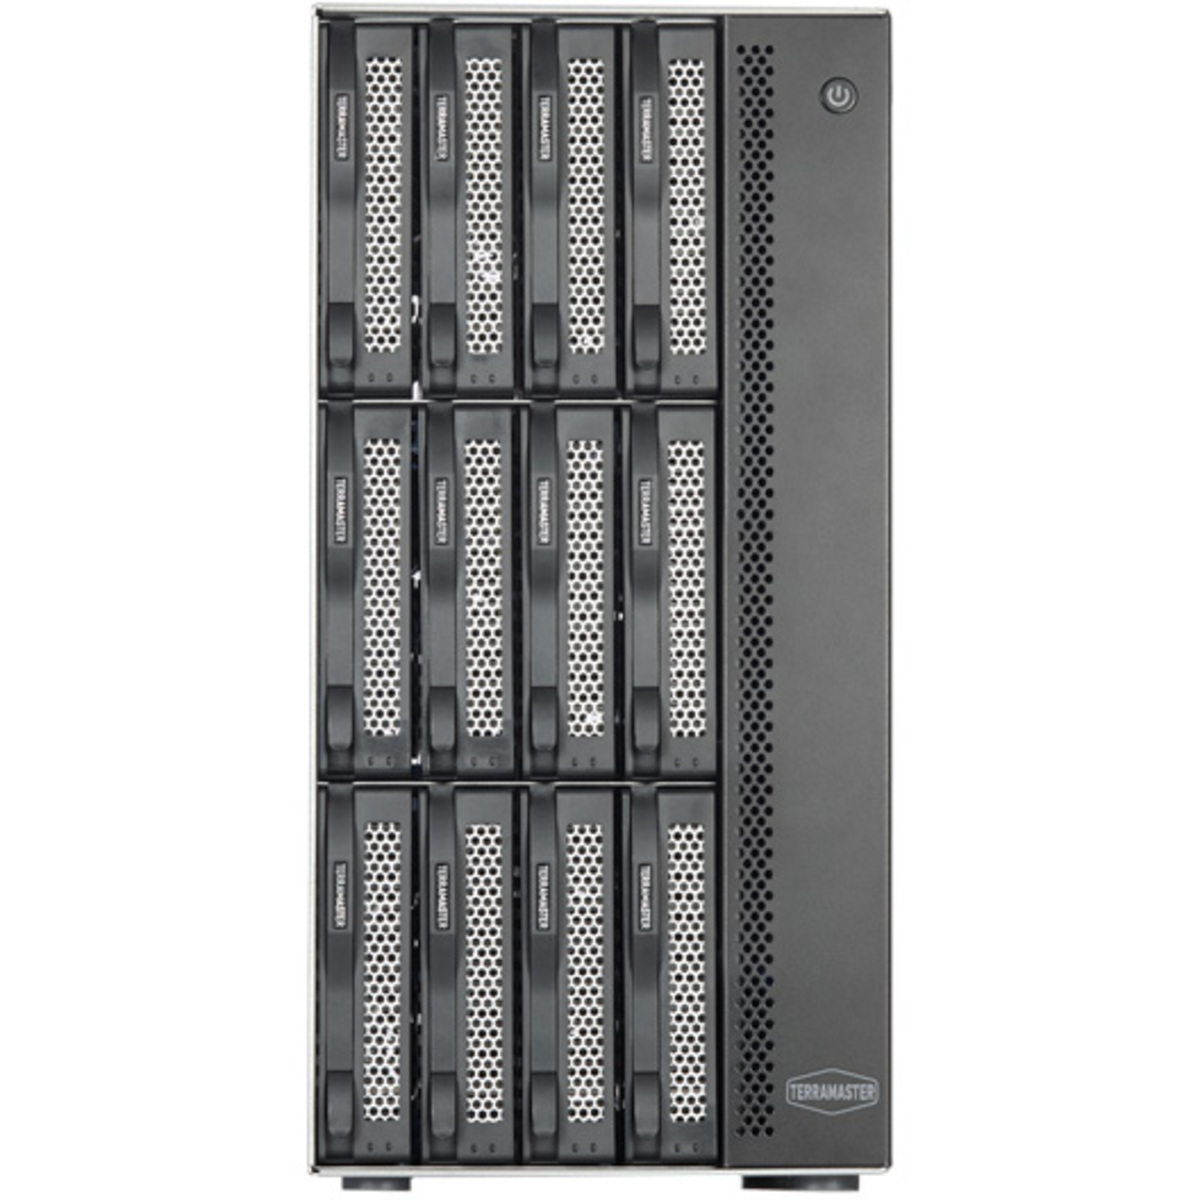 TerraMaster T12-423 192tb 12-Bay Desktop Multimedia / Power User / Business NAS - Network Attached Storage Device 12x16tb Seagate EXOS X18 ST16000NM000J 3.5 7200rpm SATA 6Gb/s HDD ENTERPRISE Class Drives Installed - Burn-In Tested T12-423